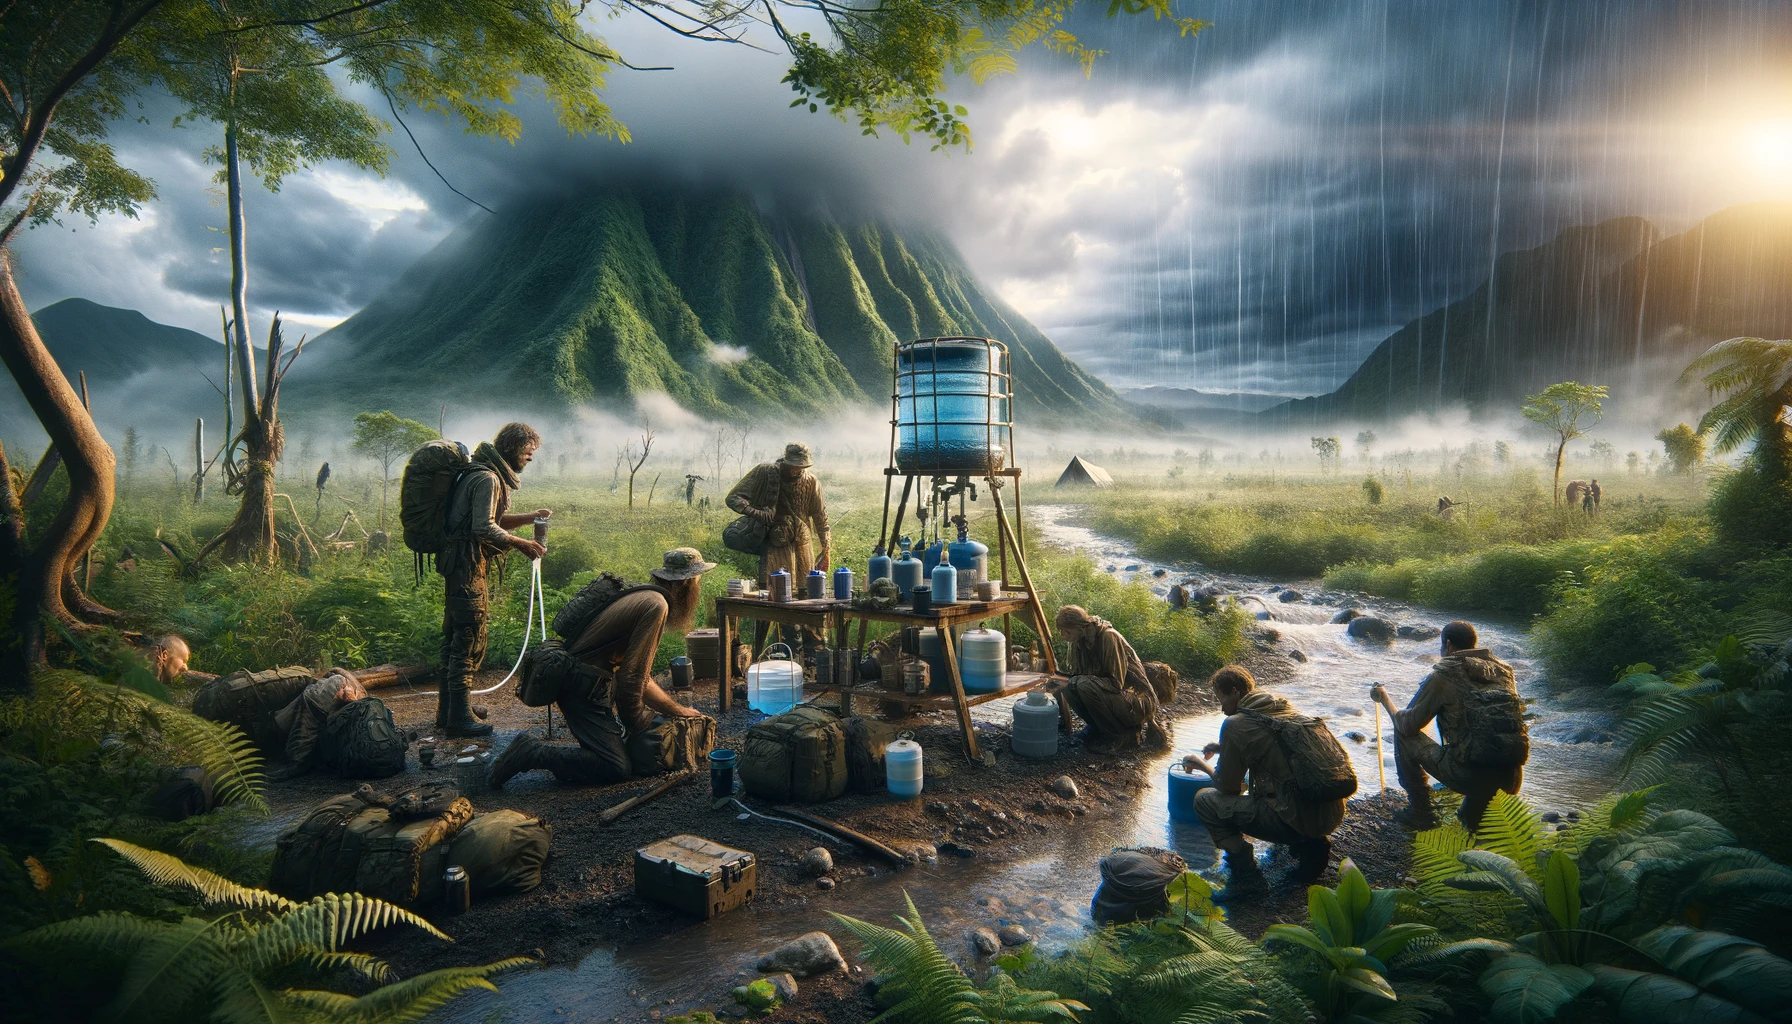 Alt text: "A group of survivalists in a lush, recovered wilderness implements innovative water collection and purification techniques post-apocalypse. They gather around a makeshift rainwater collection system, displaying focused yet hopeful expressions. The thriving environment, with clear signs of regrowth, symbolizes hope and underscores the critical role of hydration in sustaining life, inspiring the prepper community with sustainable survival strategies